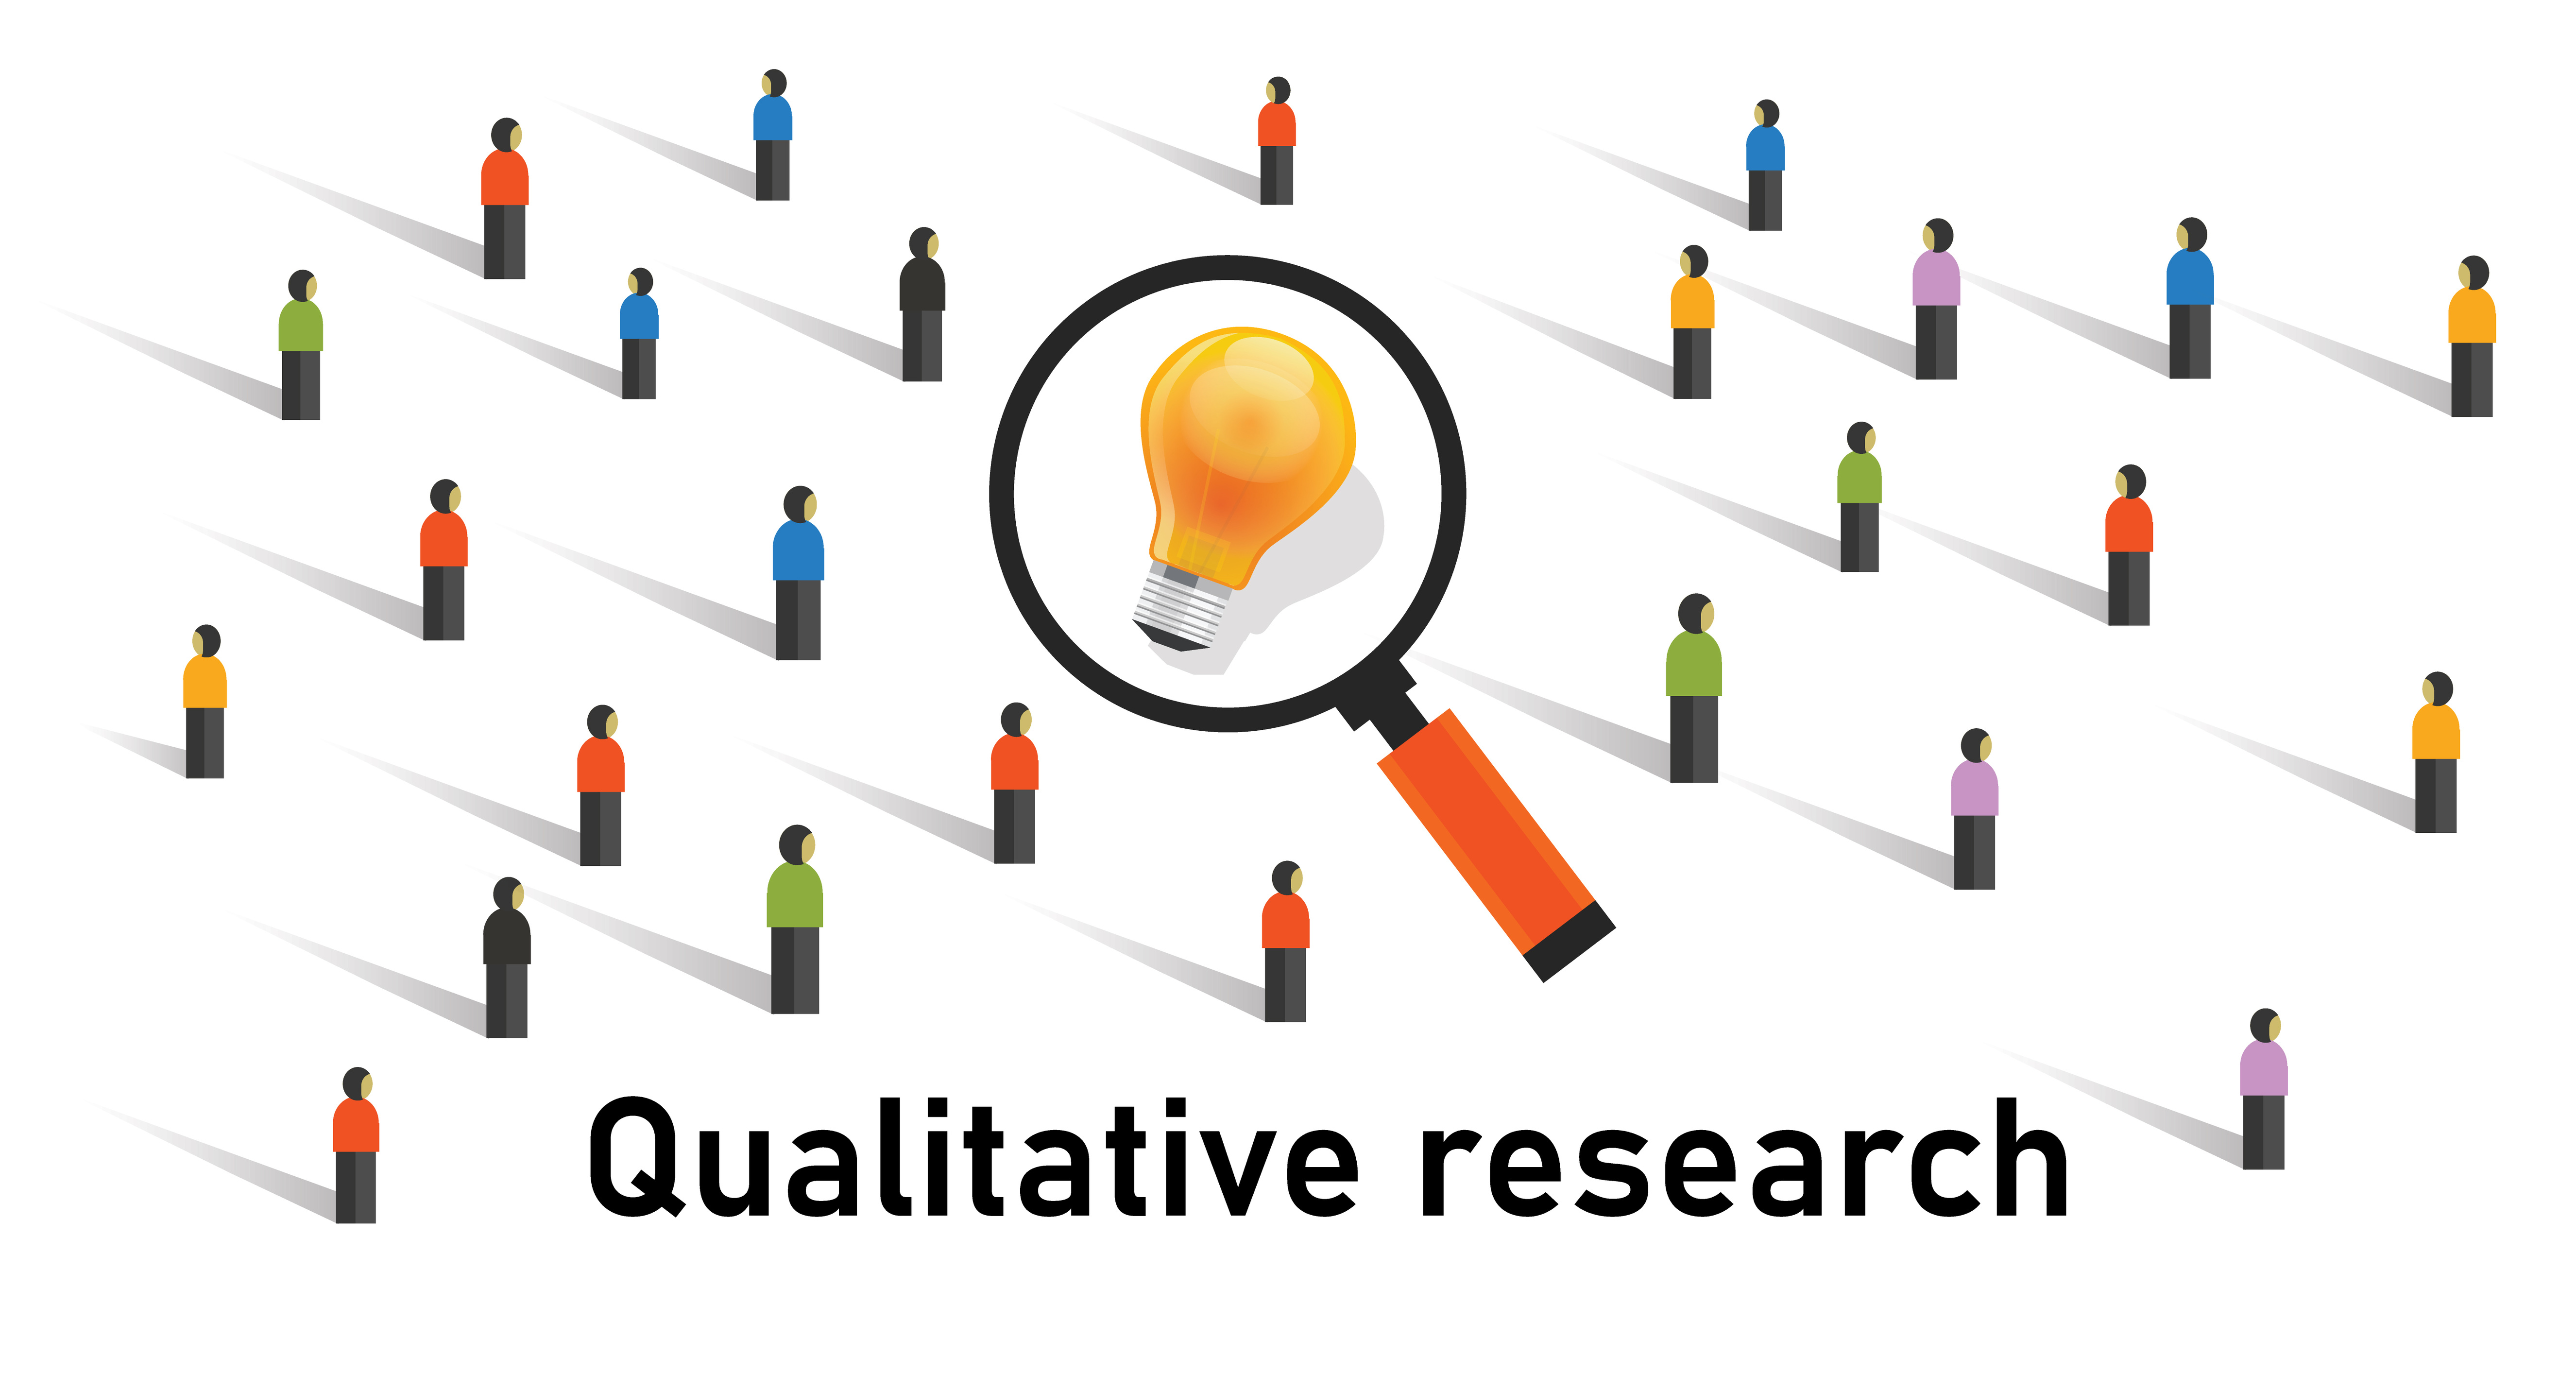 In-depth Interviews as a Qualitative Data Collection